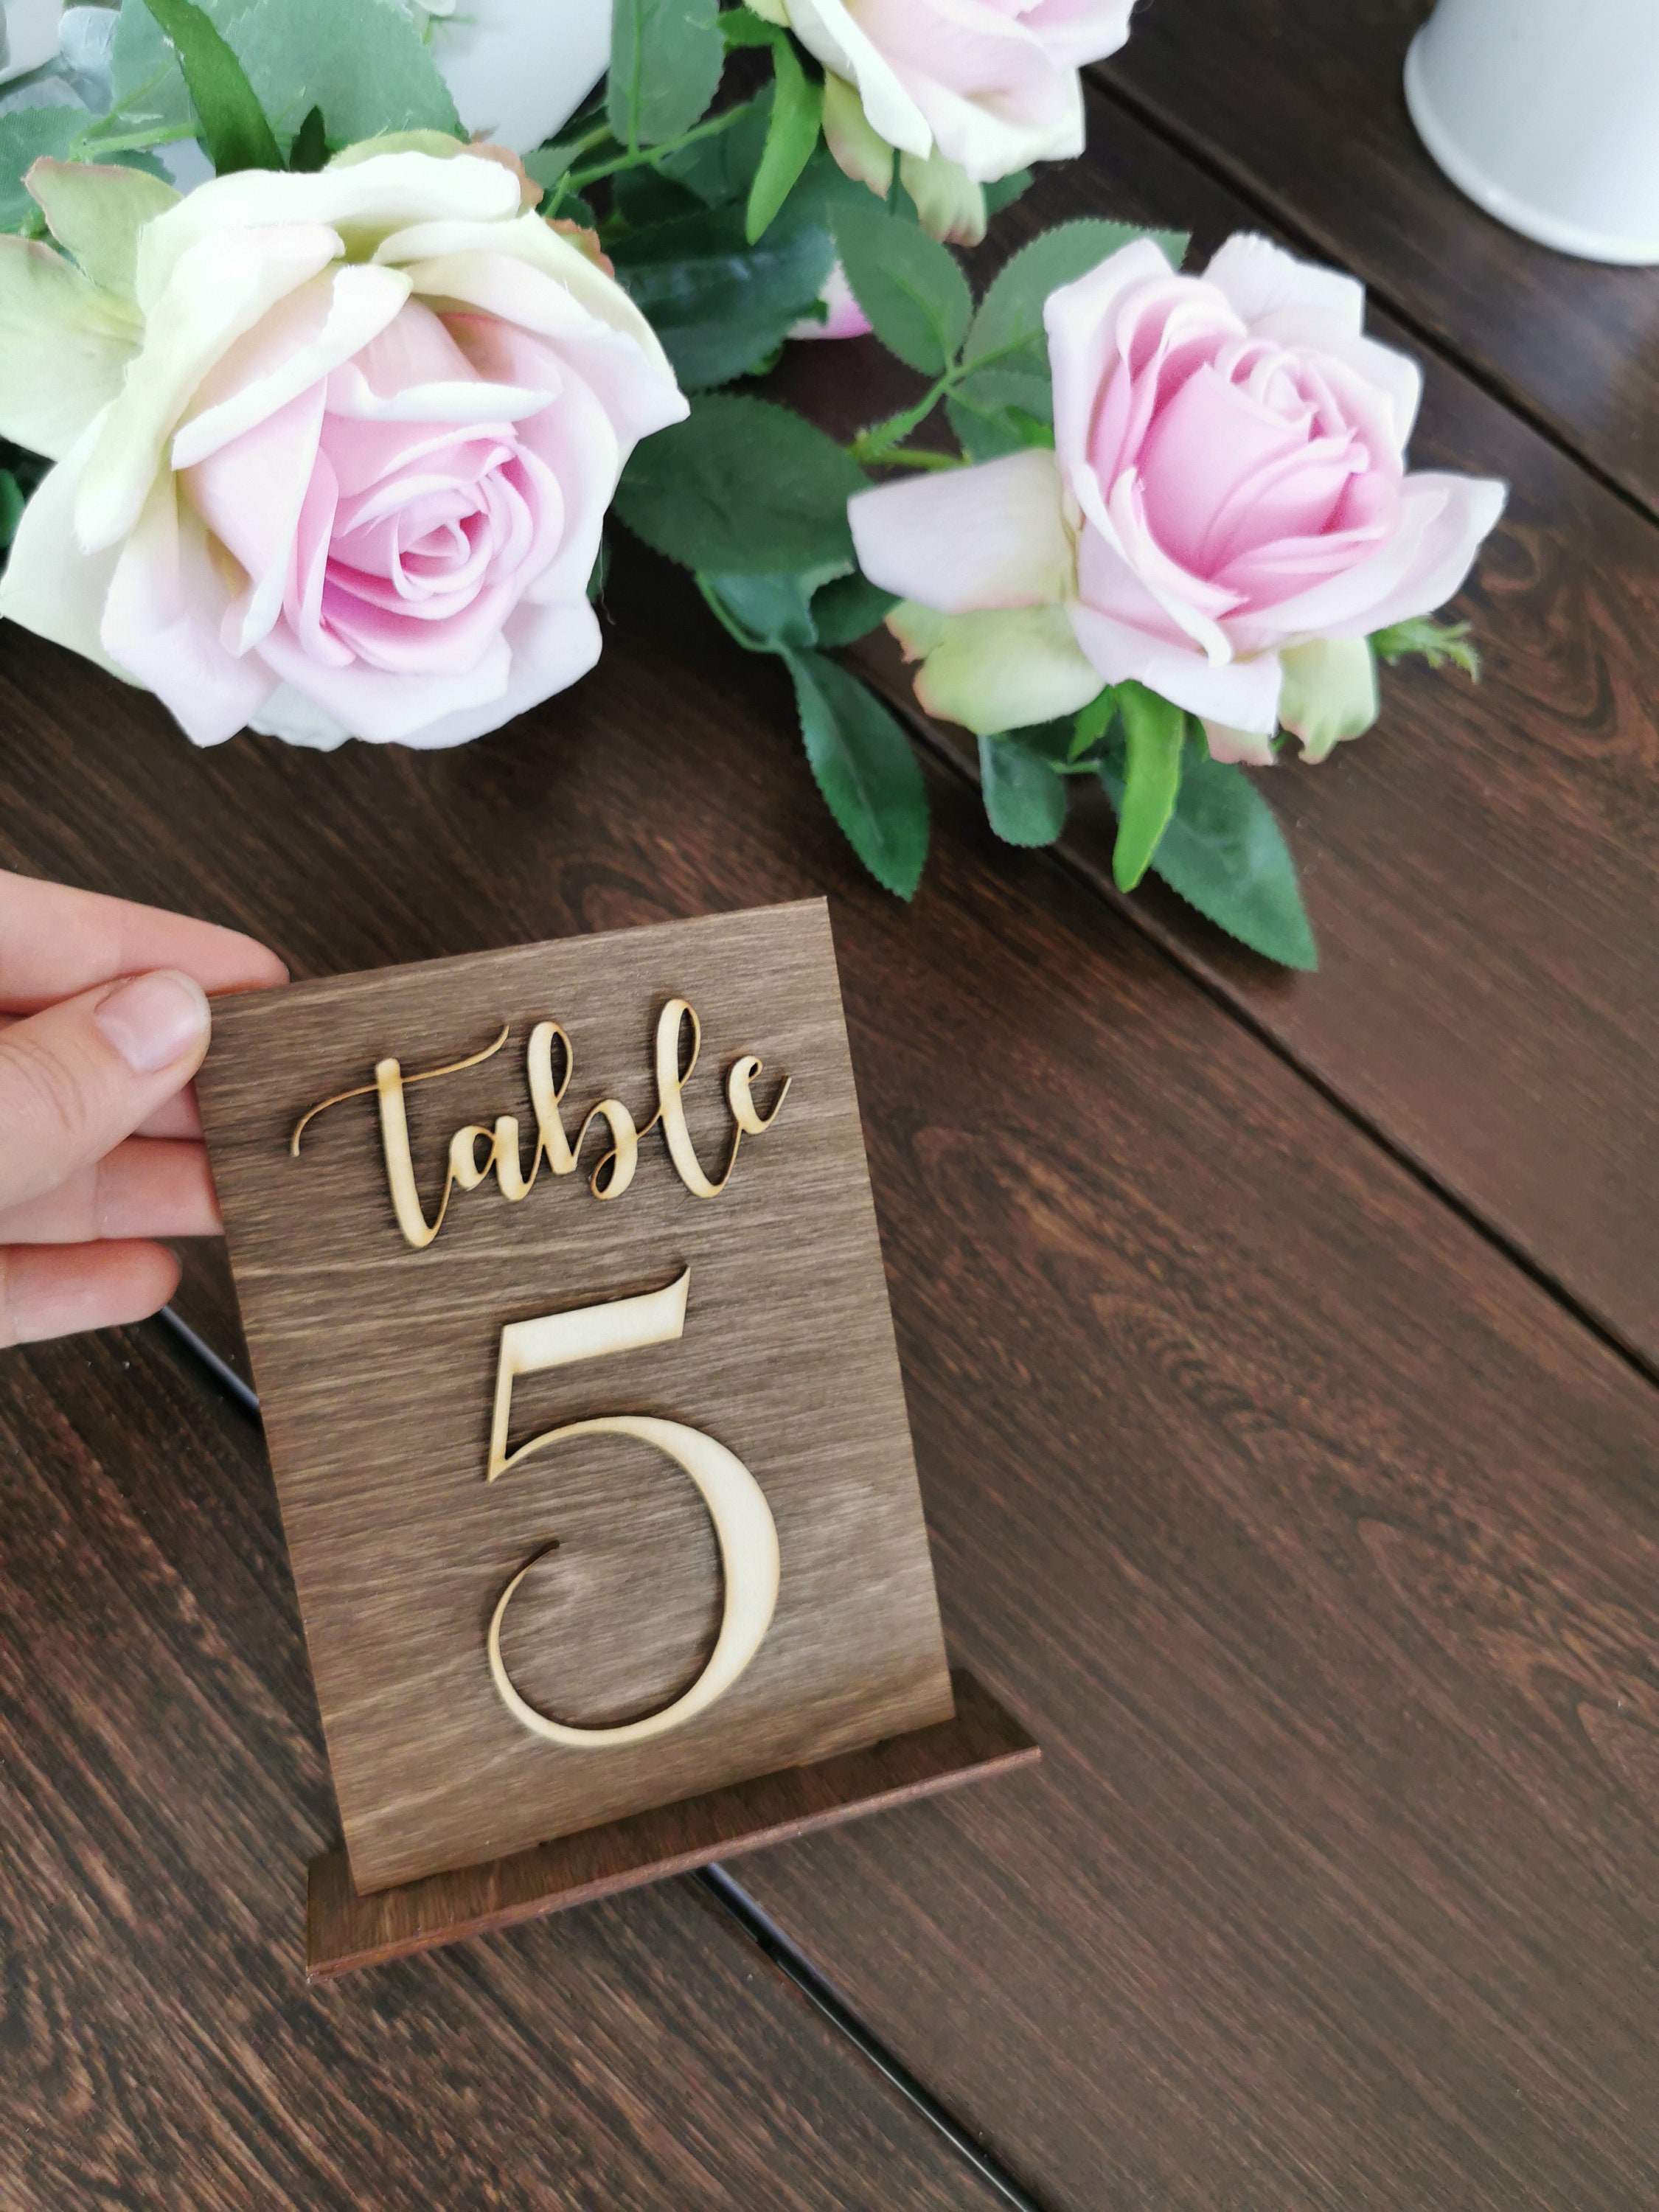  1-10 4'' Wooden Numbers - Free Standing Wedding Table Numbers -  Cafe or Restaurant Table Numbers - Rustic Wedding Table Decor : Handmade  Products